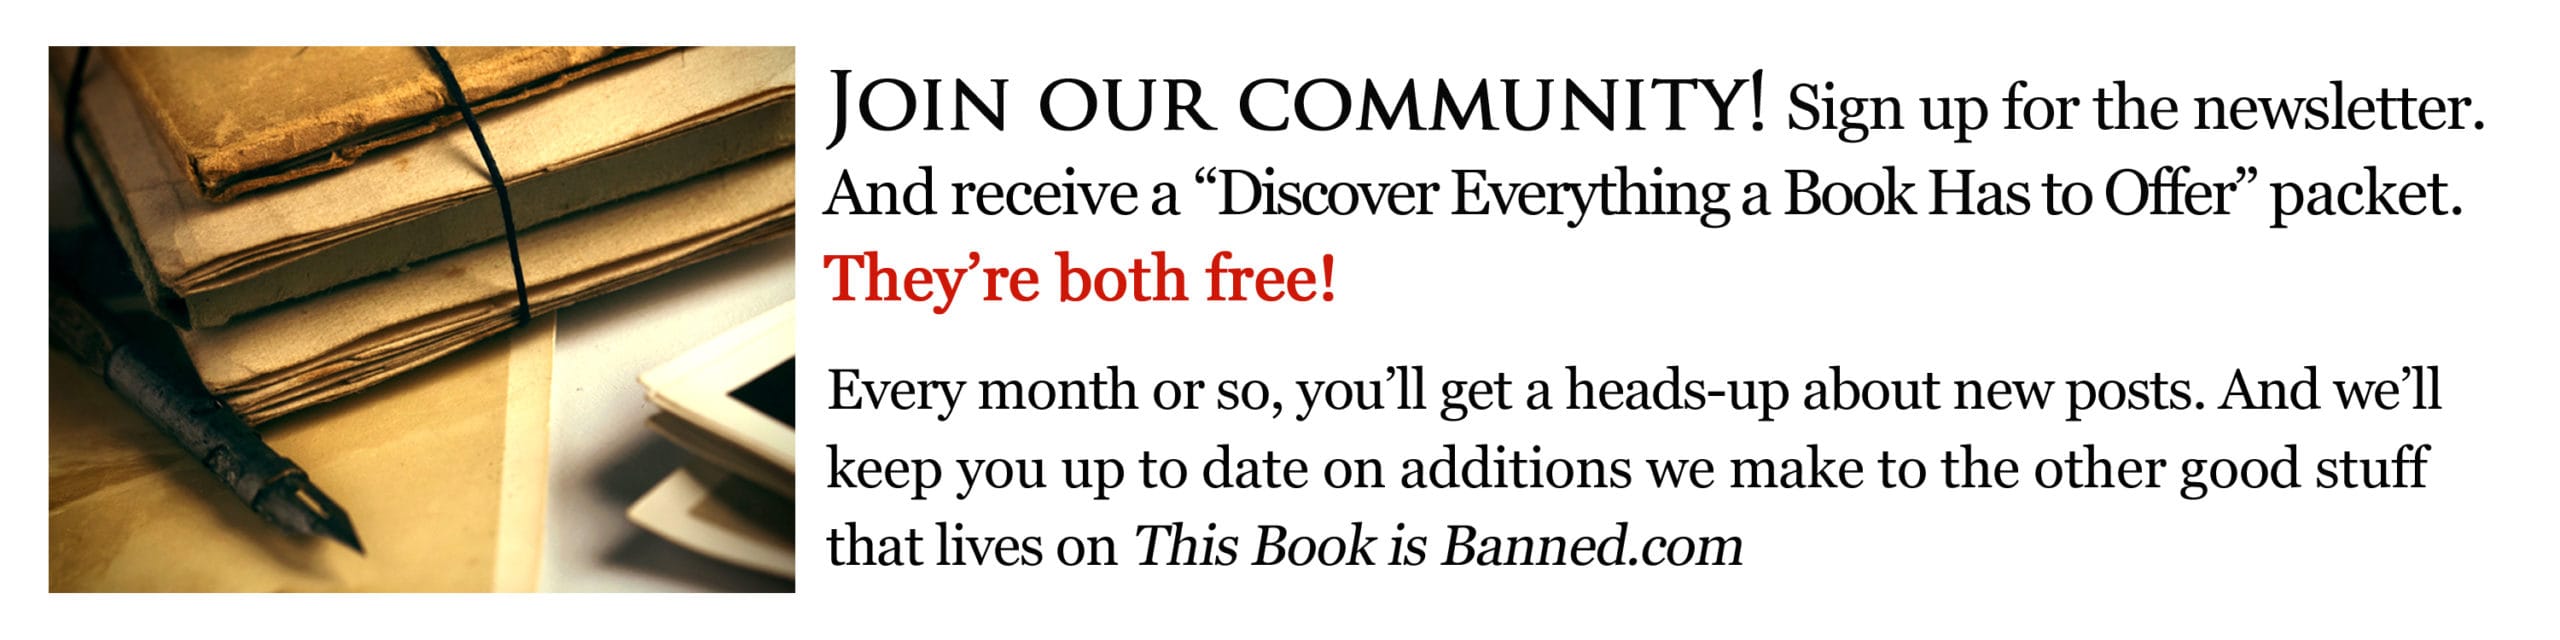 This Book is Banned-Sign up for the free newsletter!